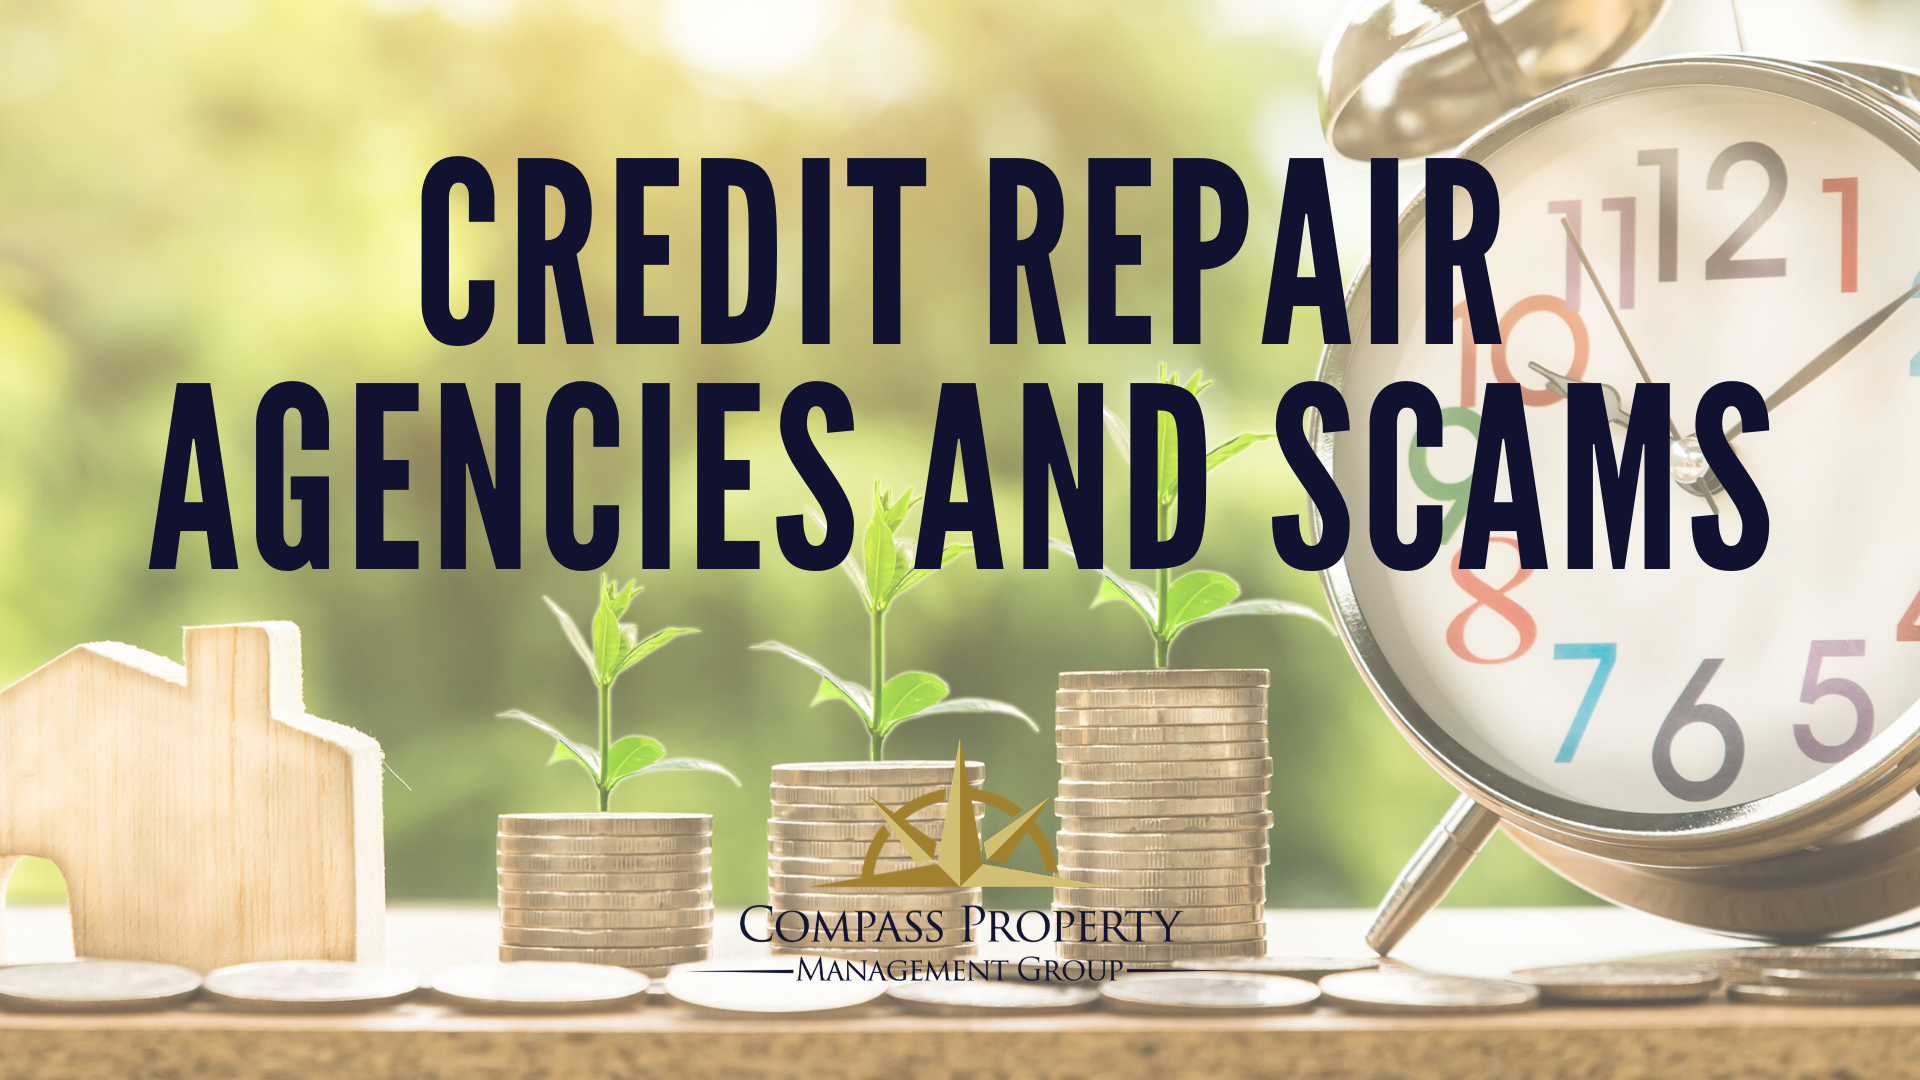 Credit Repair Agencies and Scams - Compass Property Management